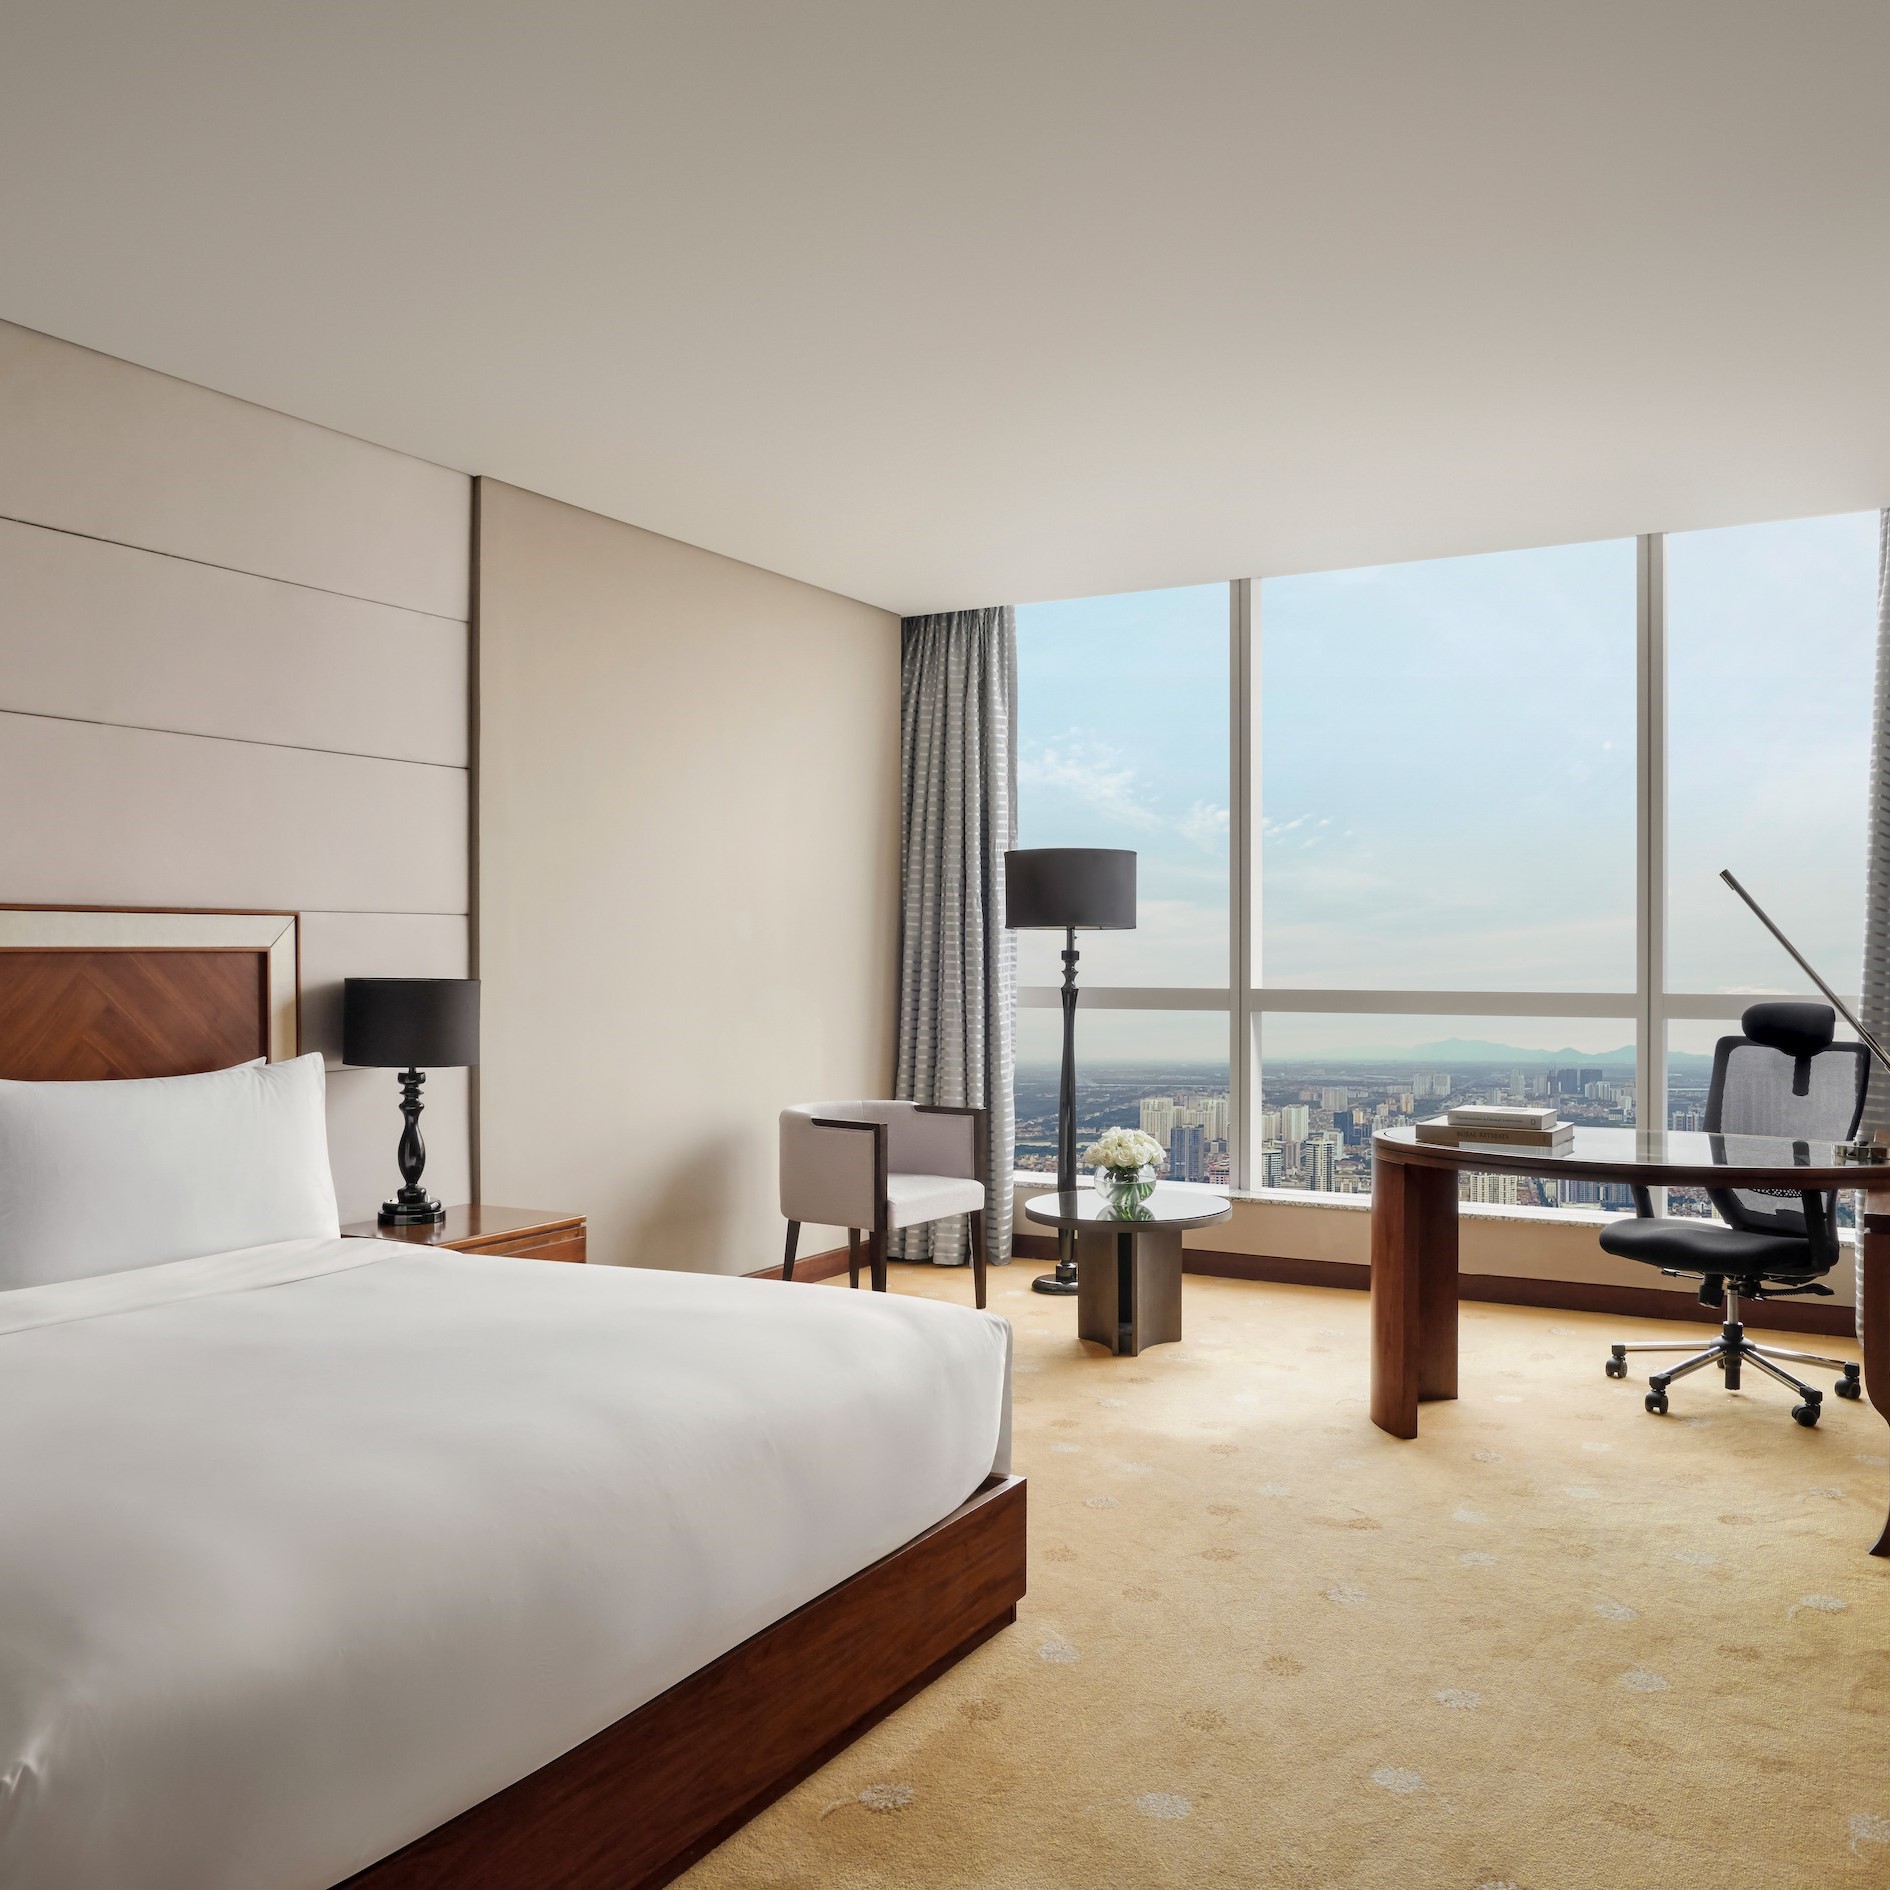 Luxurious accommodation with the Club InterContinental Rooms at InterContinental Hanoi Landmark72